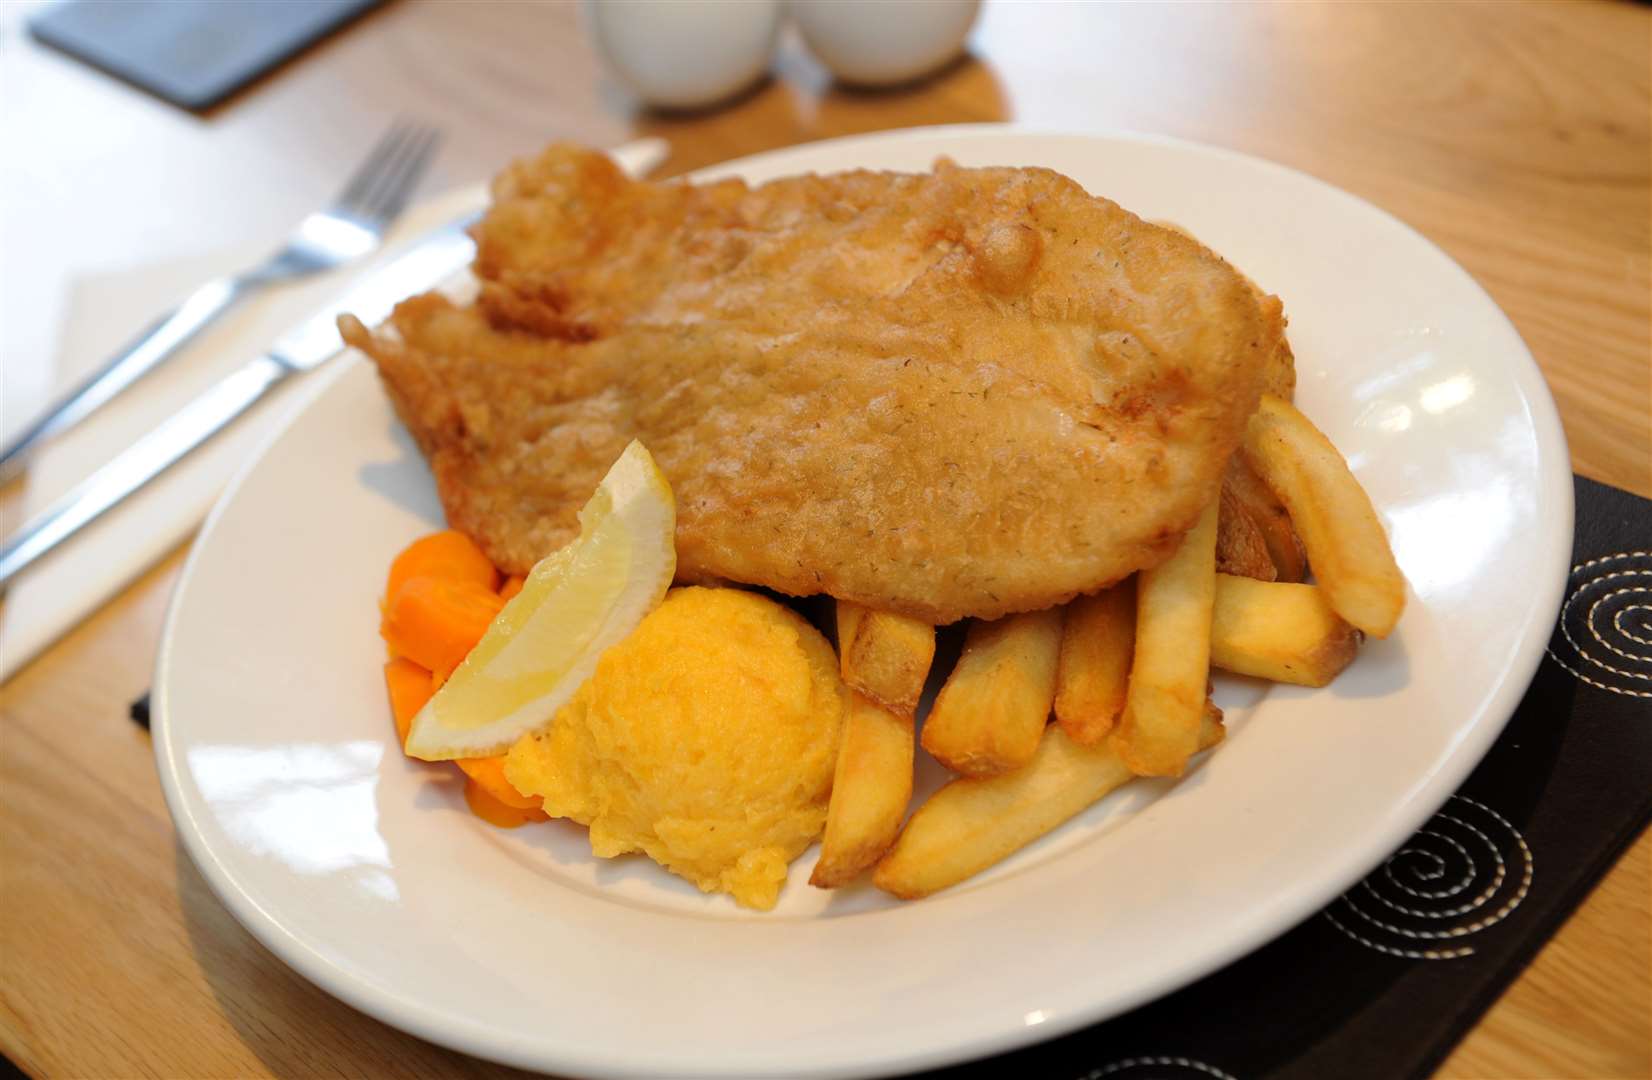 Food writer Sean Murphy has listed his top ten fish and chip restaurants in Scotland.